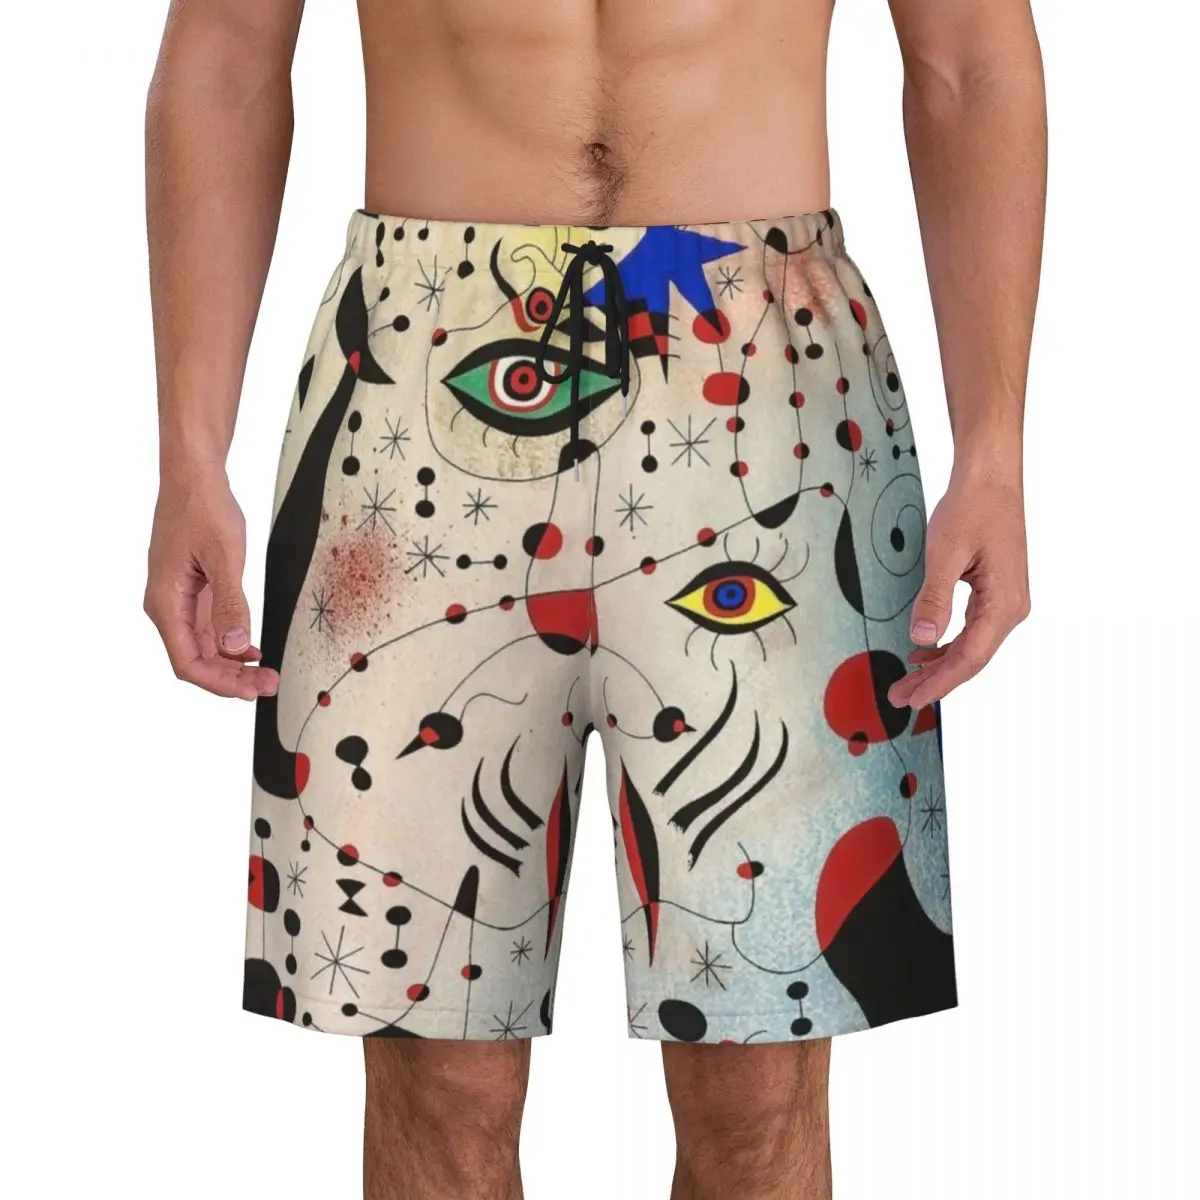 

Ciphers And In Love With A Woman Print Swim Trunks Quick Dry Swimwear Beach Board Shorts Joan Miro Abstract Art Boardshorts